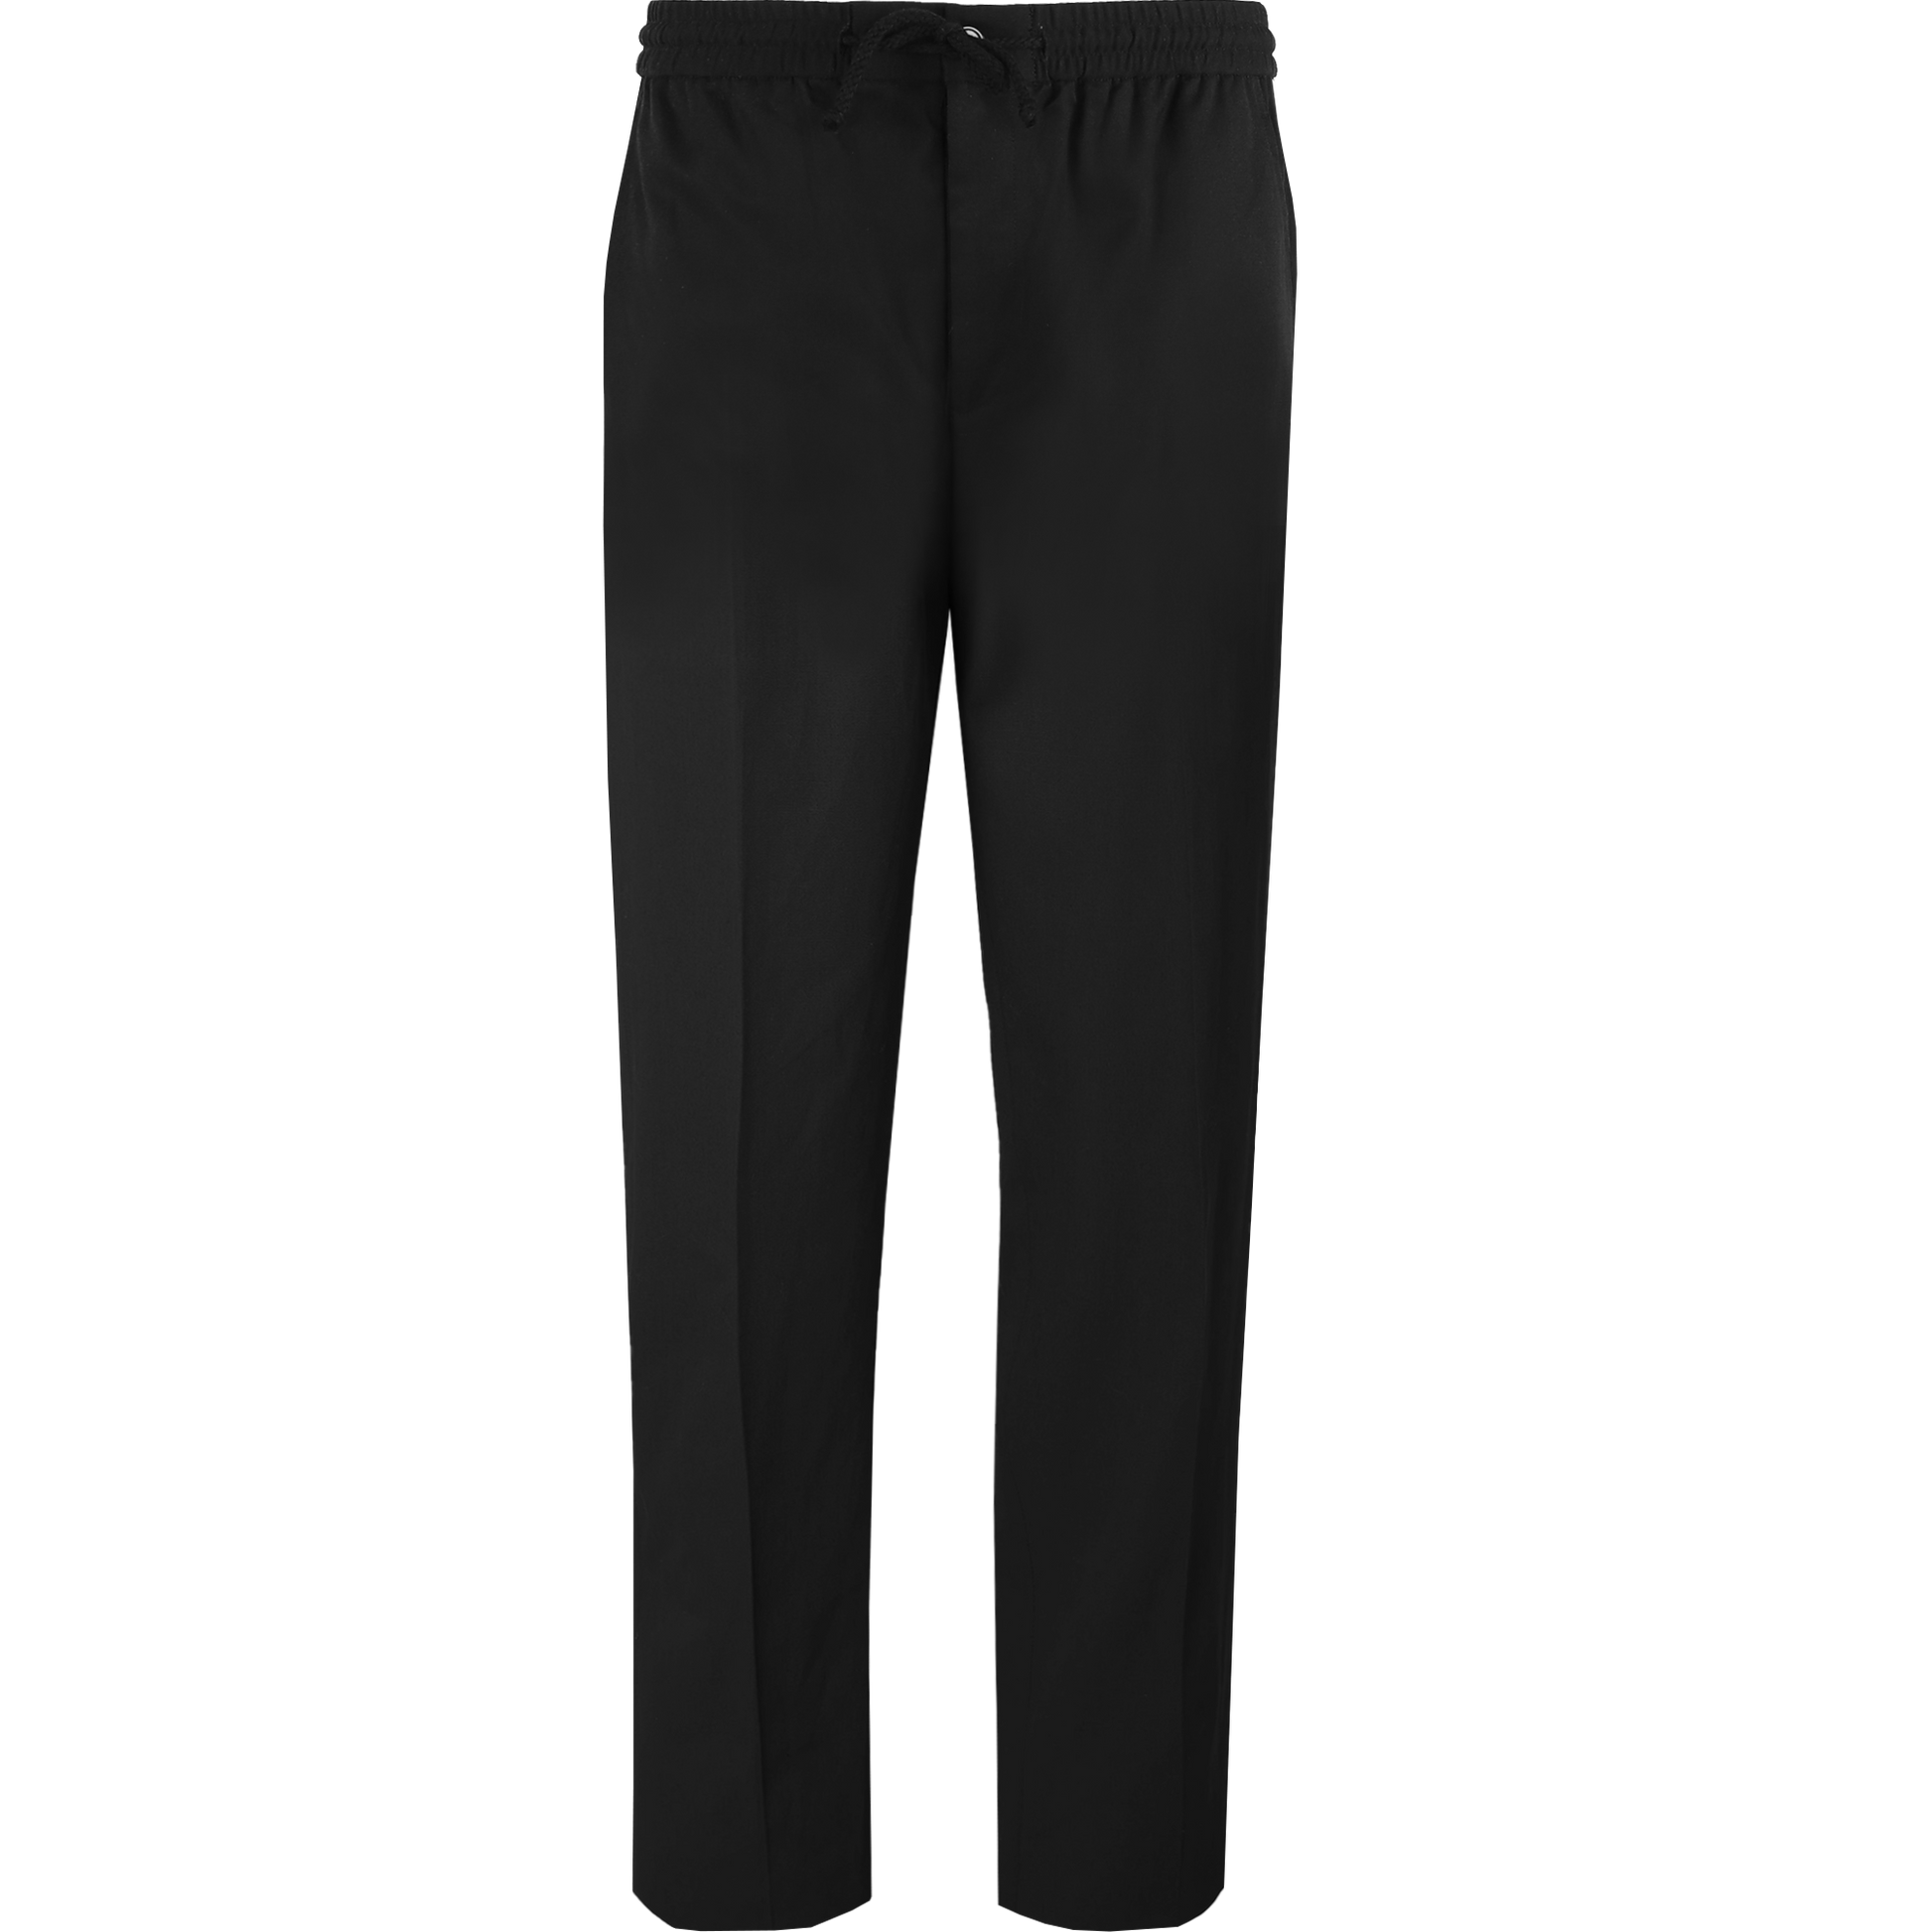 Mens Corporate Uniform Pants with Drawstring Waistband by CYC Corporate Label